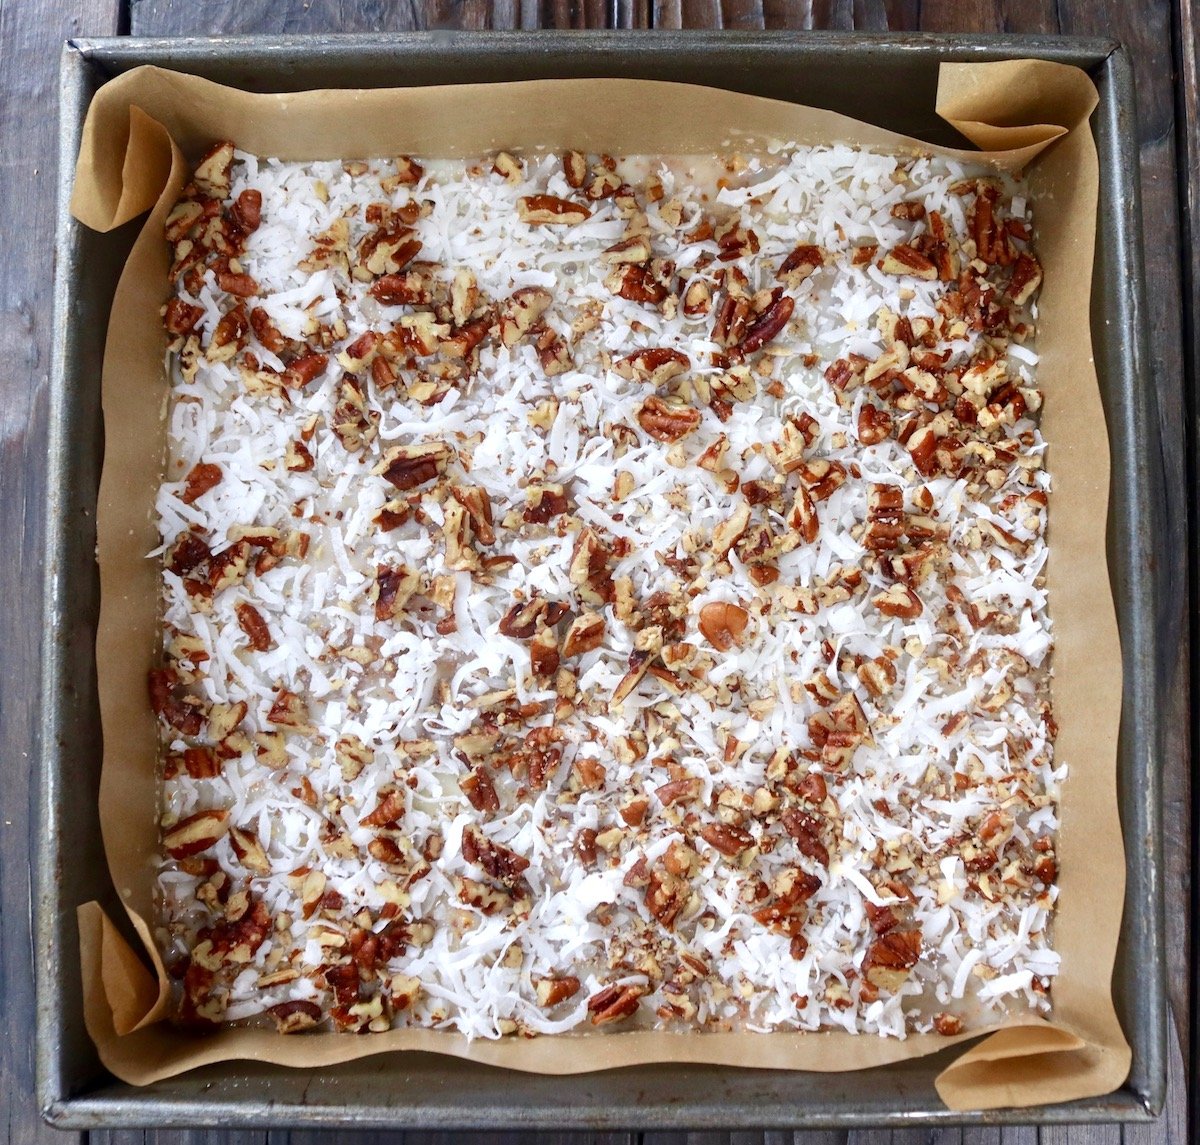 Coconut and pecan pieces in a parchment paper-lined square baking pan.